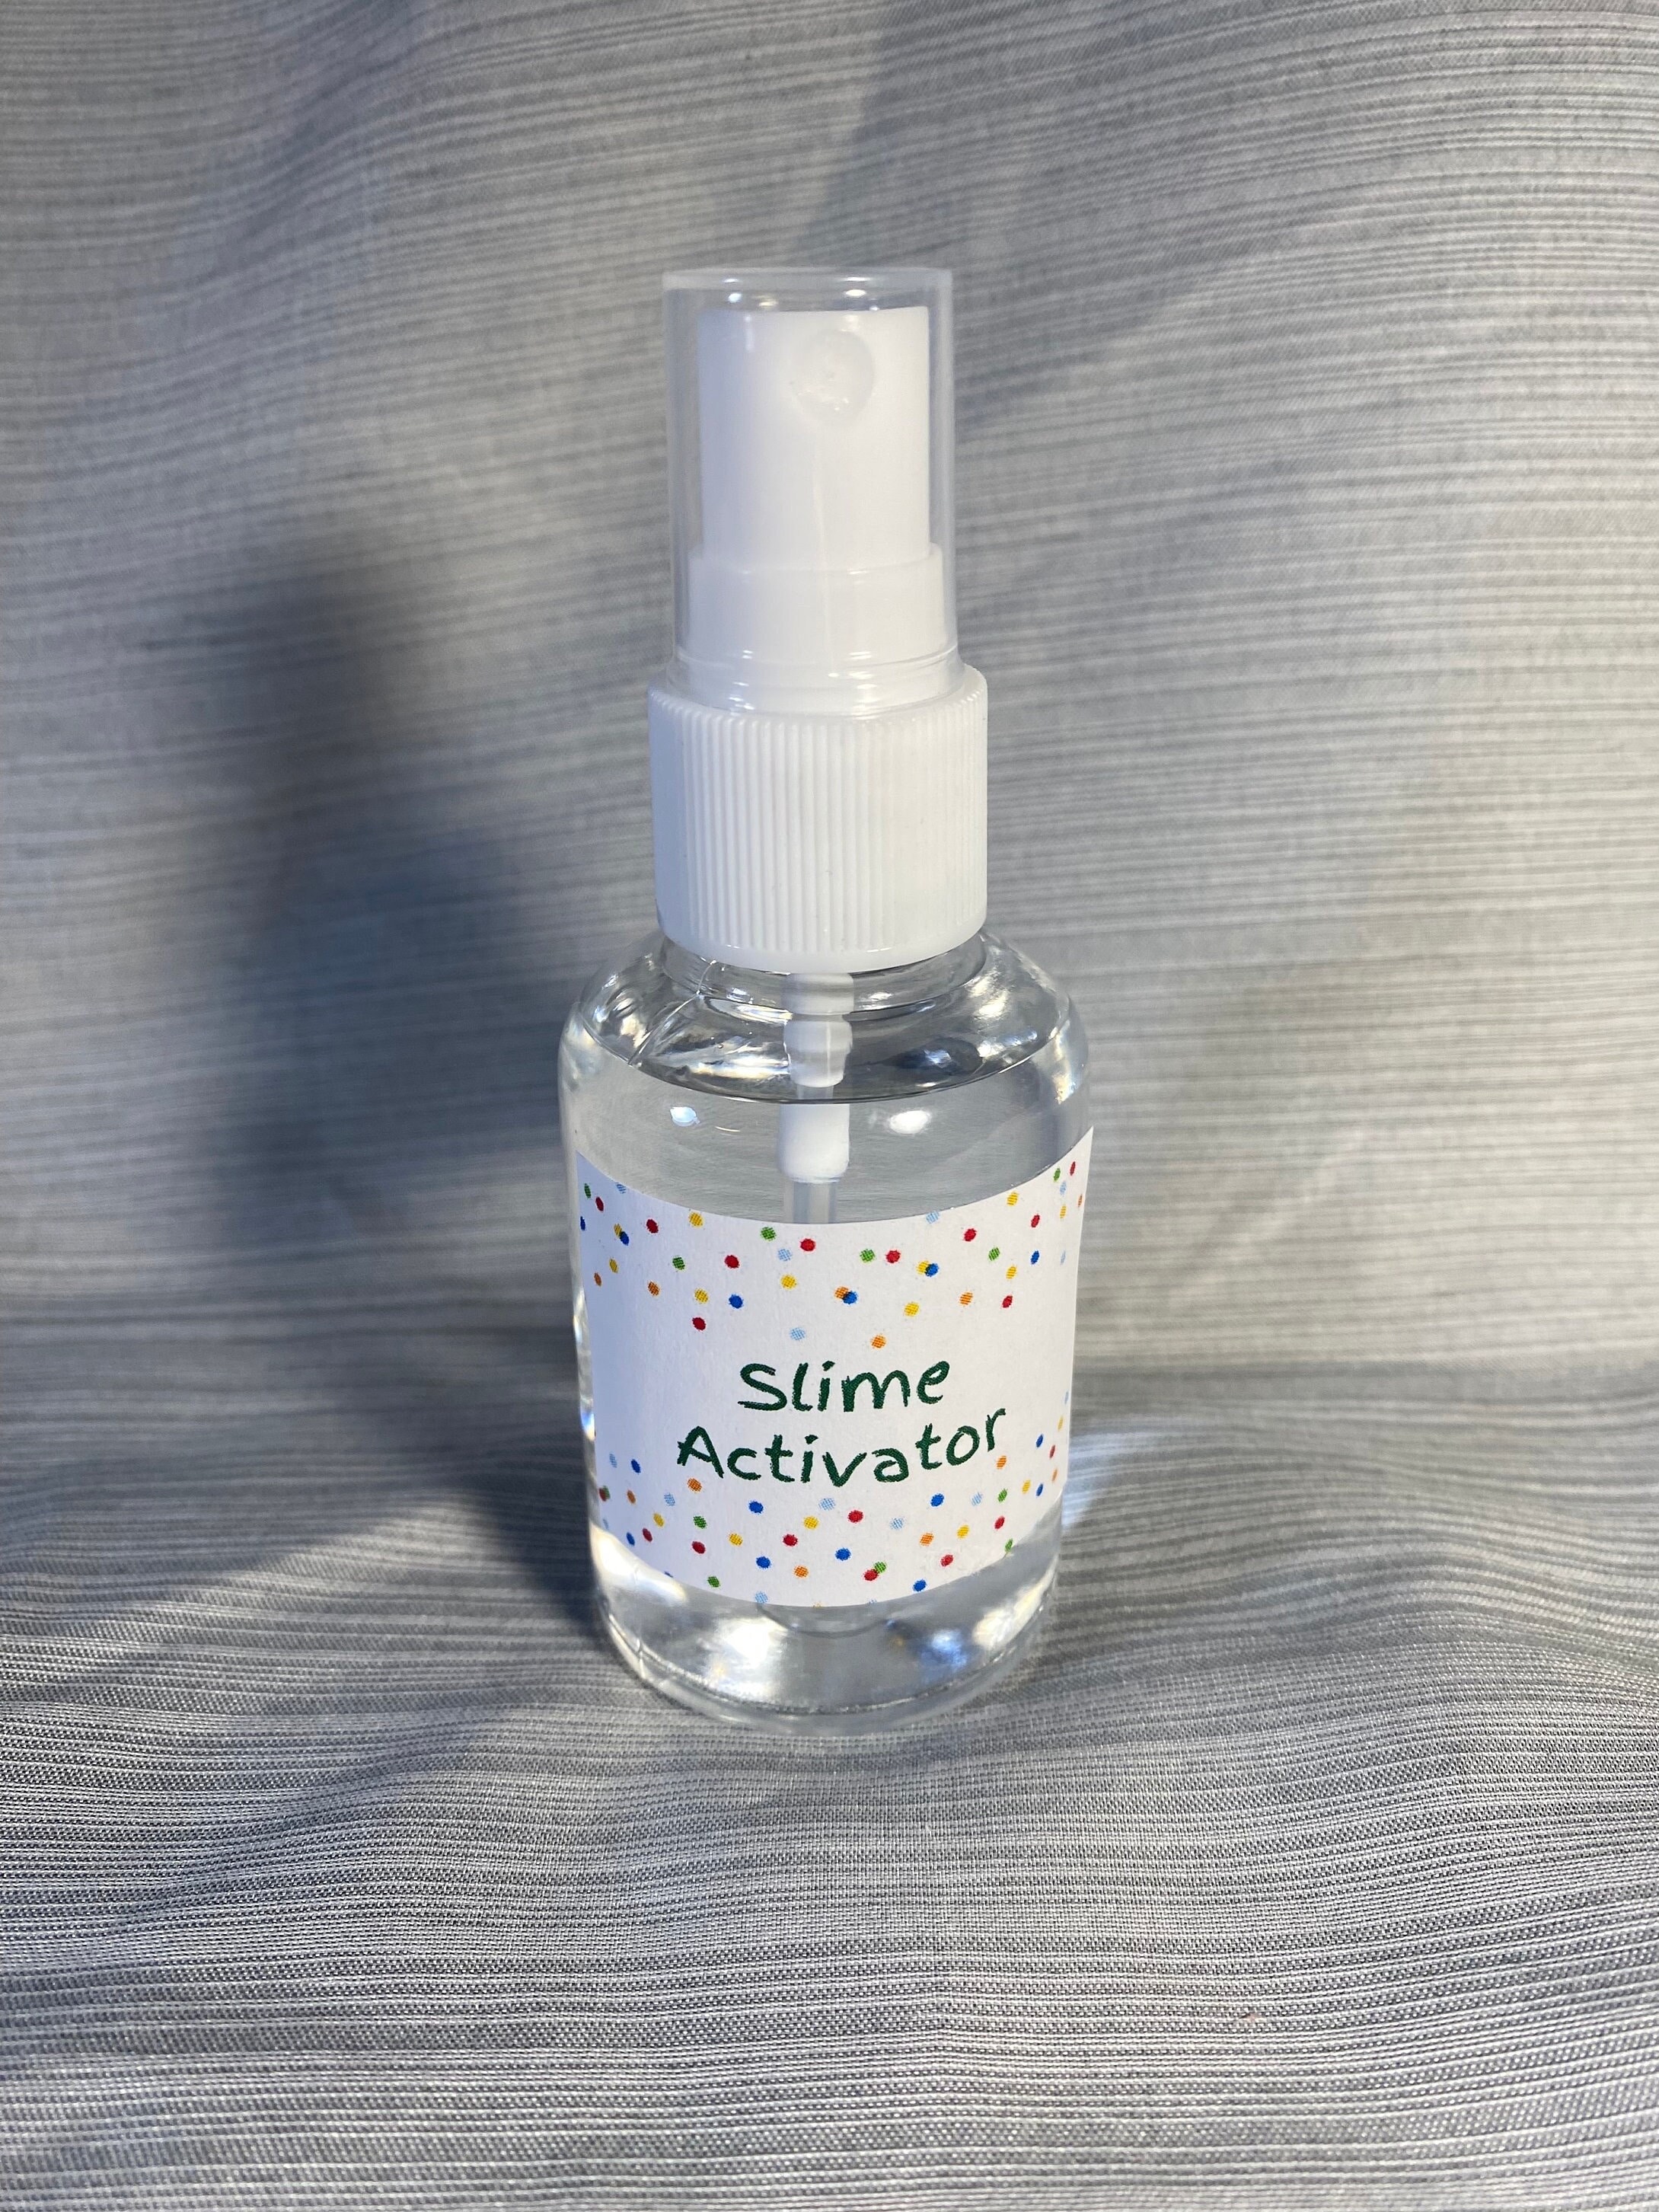 Slime Activator 500 incl refill available online at dj slimeygloop